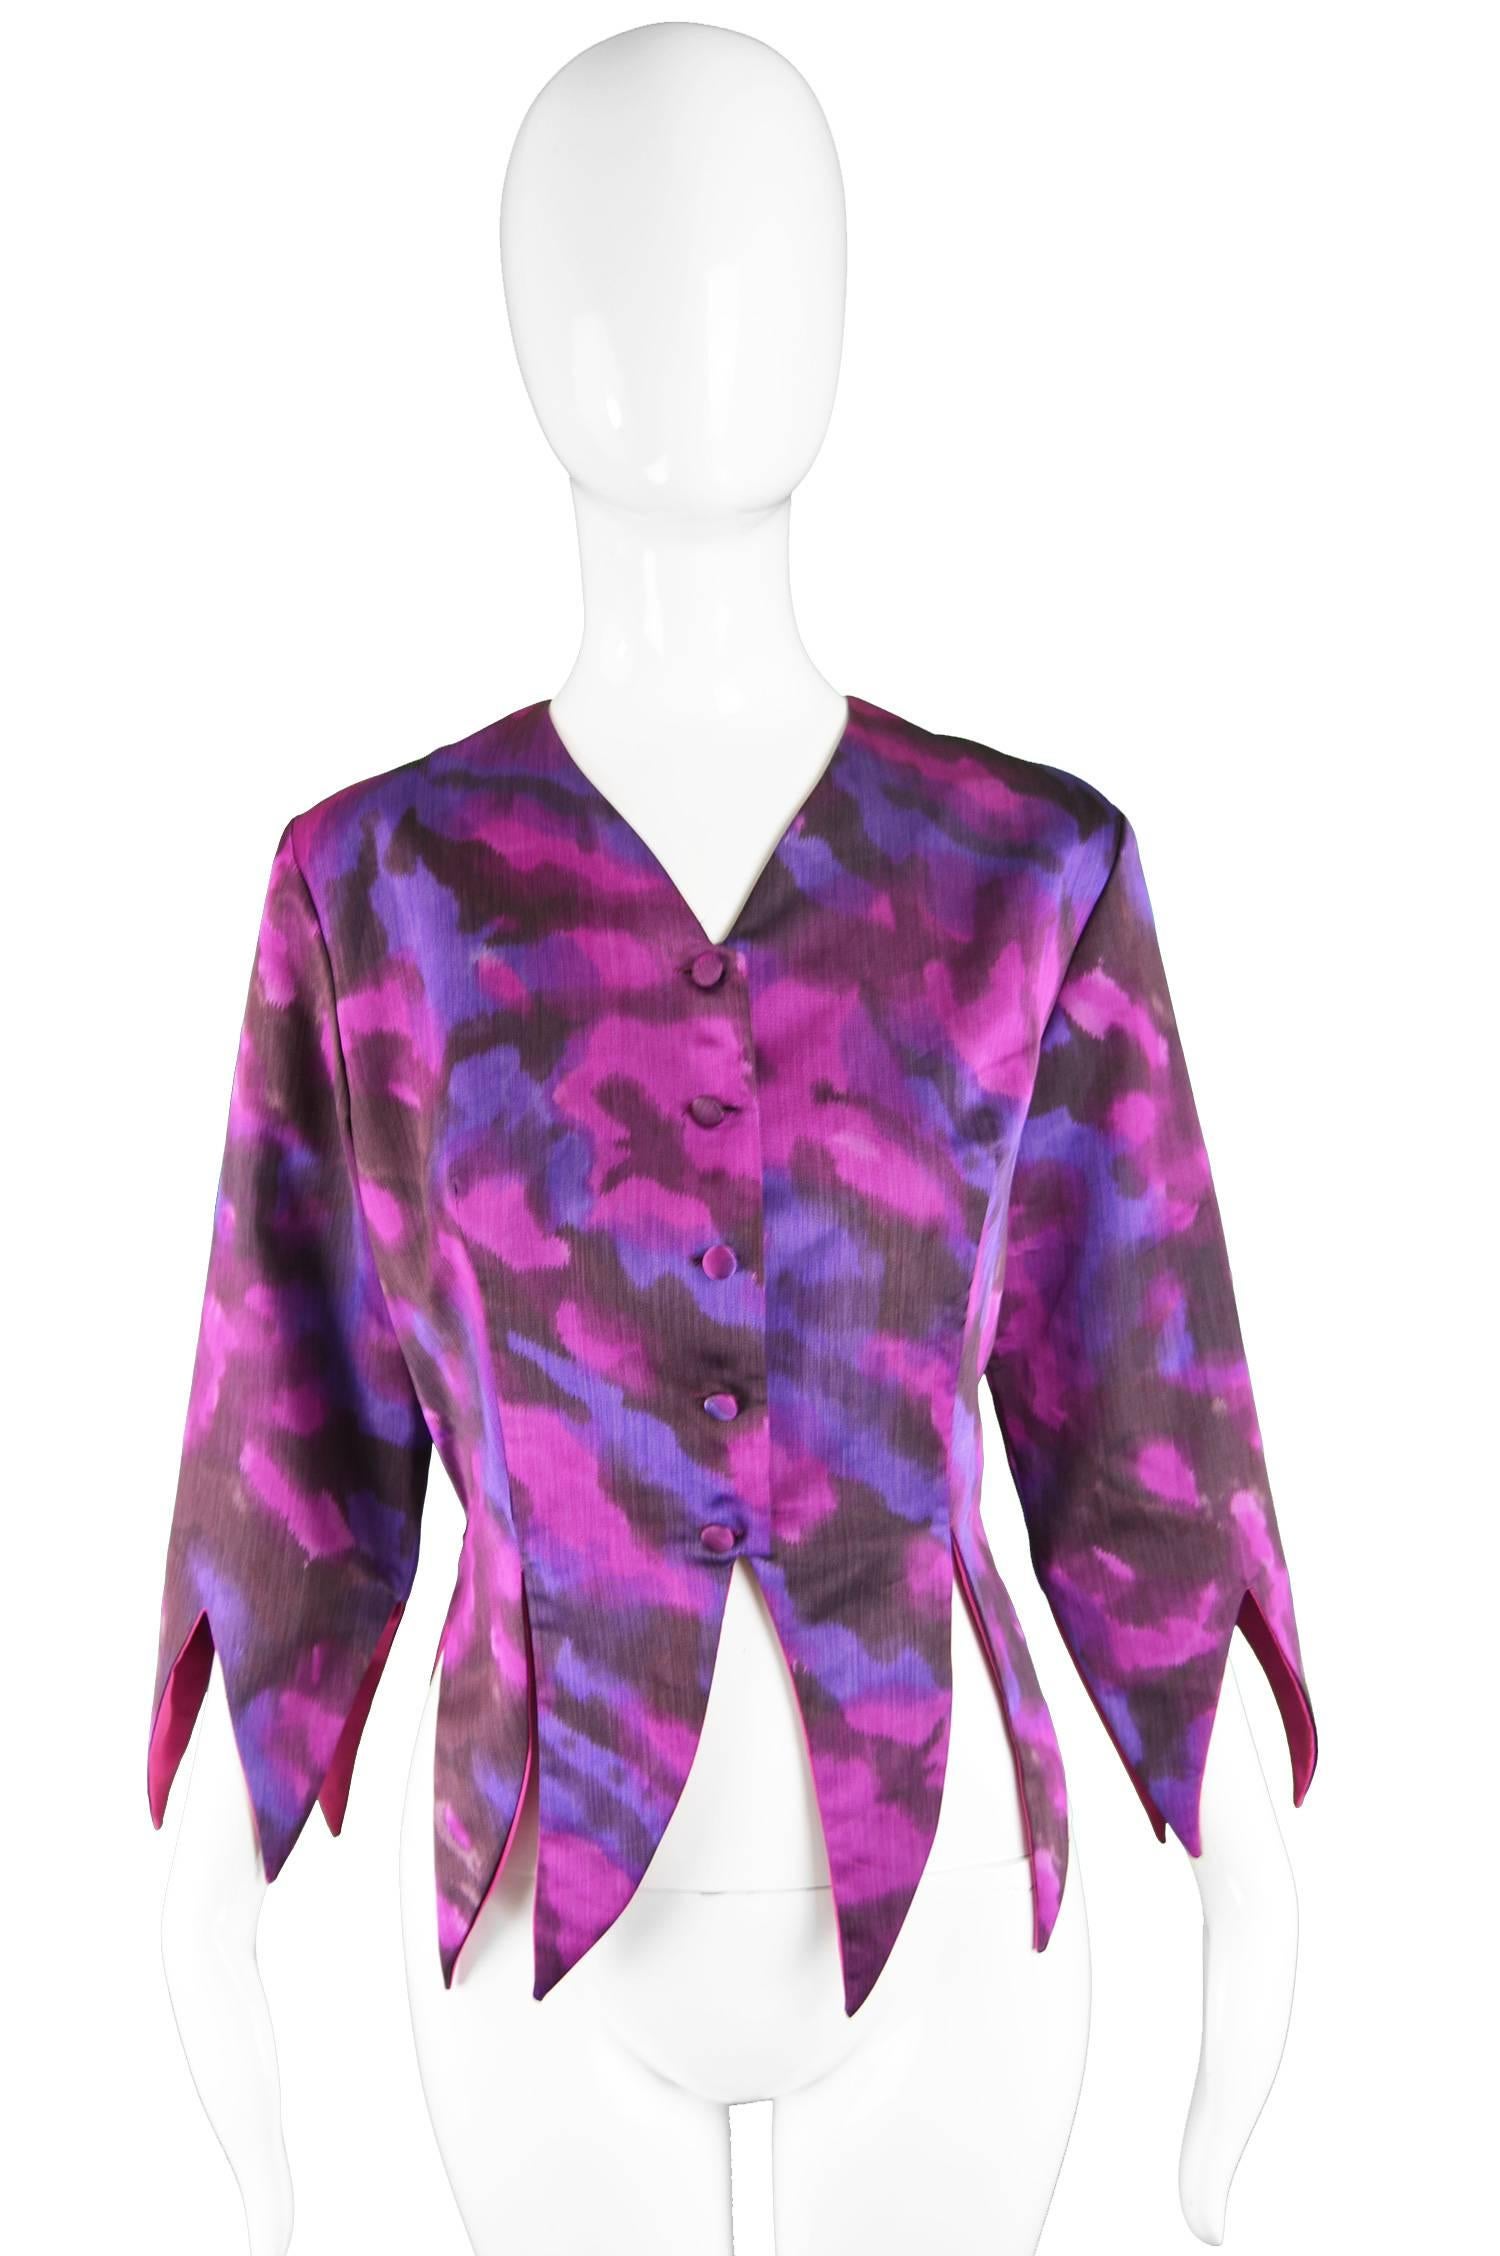 A crazy yet high quality vintage women's jacket from c. the 1980s in a purple and pink marbled effect fabric with unusual pointed hem creating a punk luxe effect and three quarter sleeves. By Michael Welford for Romney

Estimated Size: UK 12/ US 8/